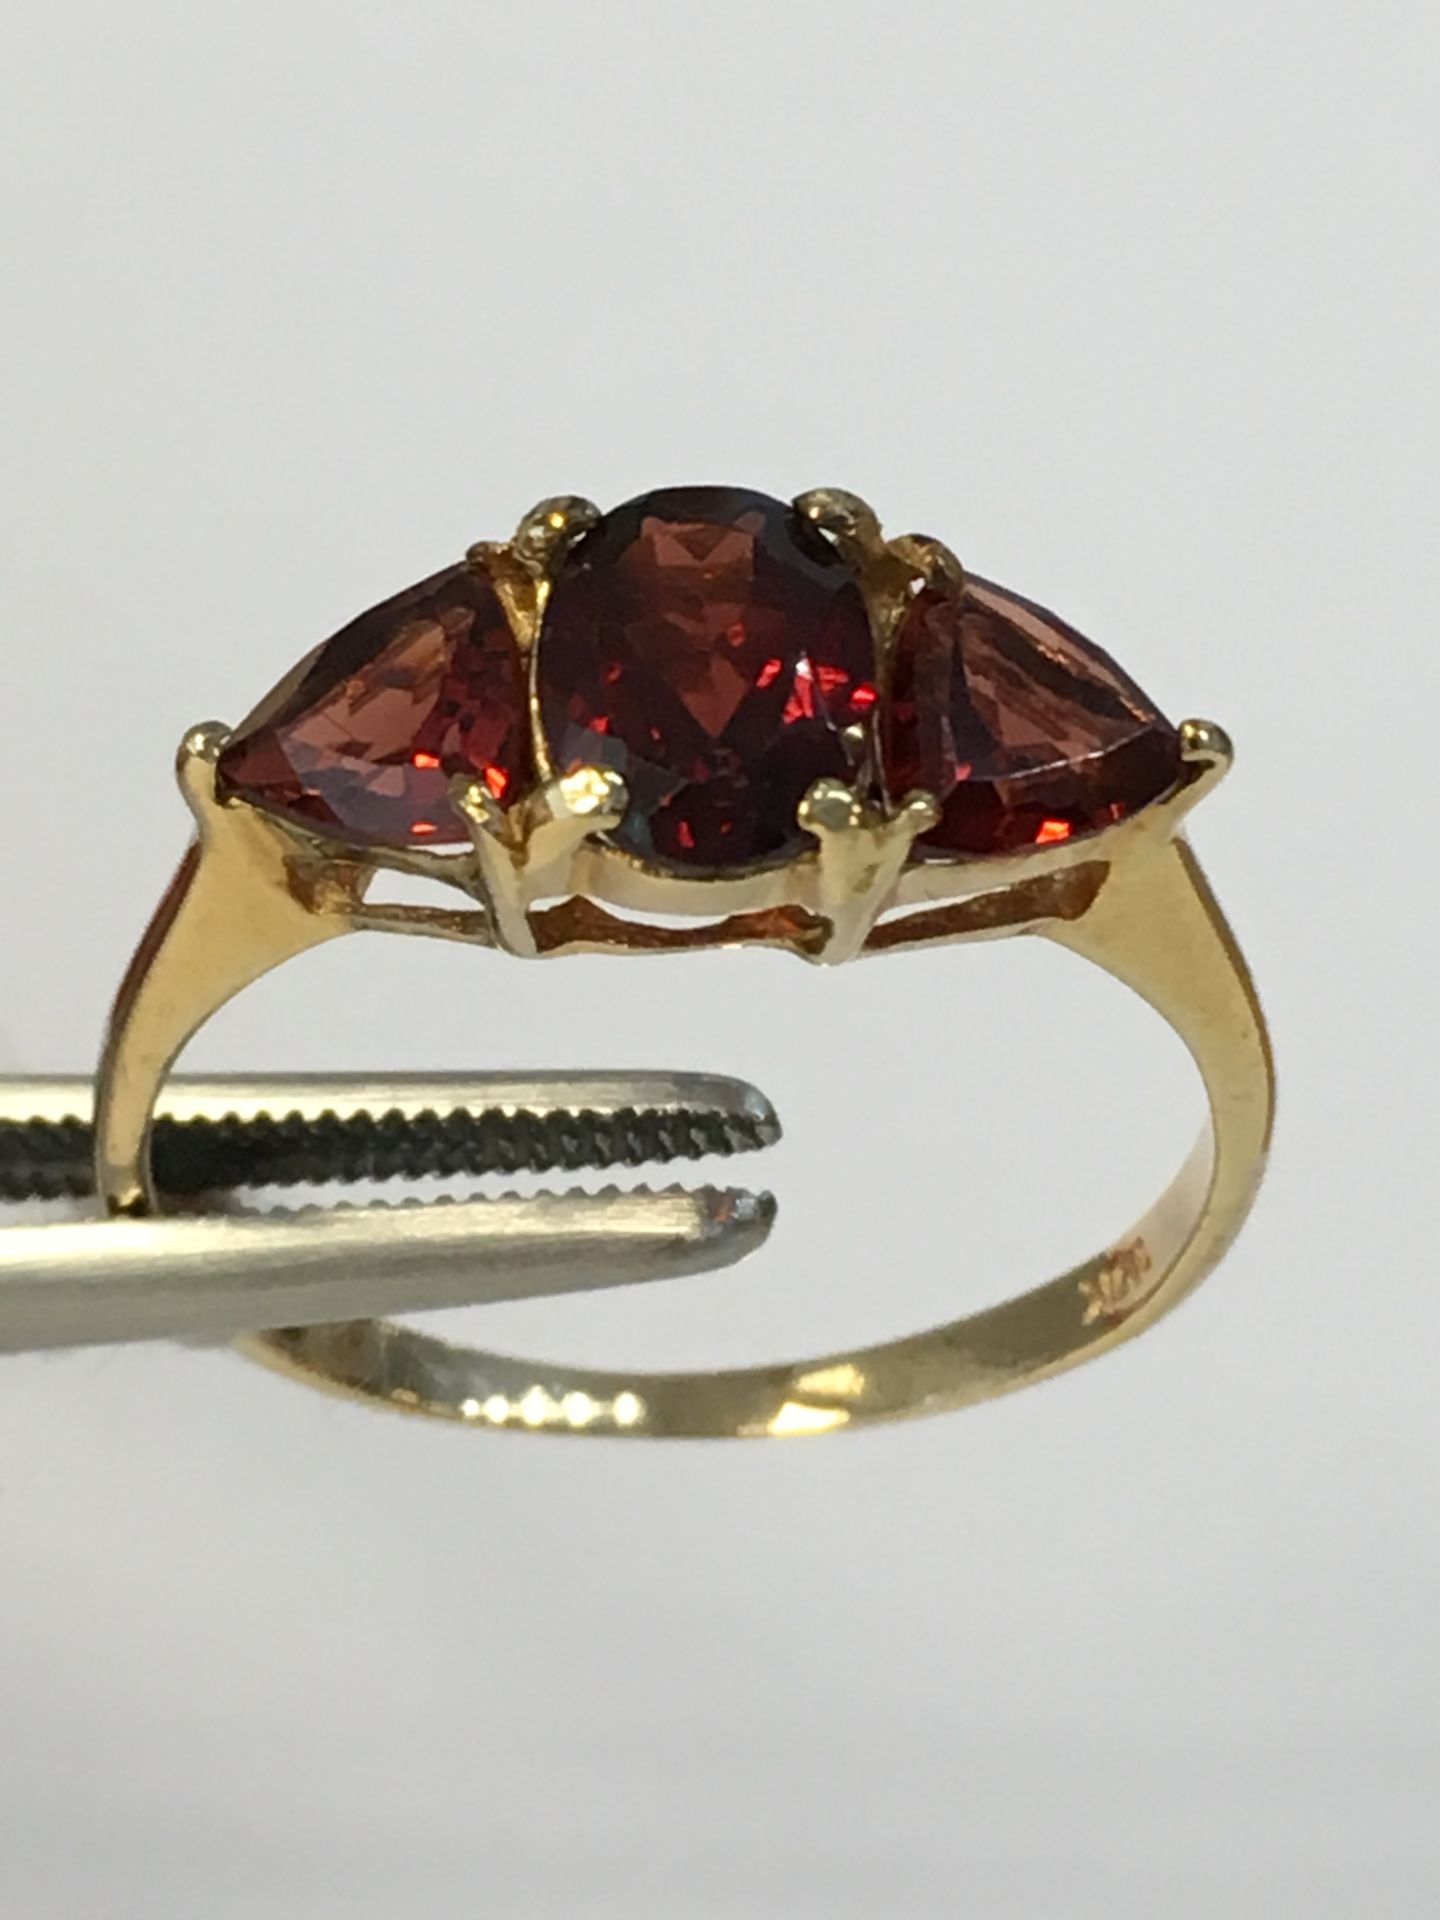 10K Yellow Gold ring with 3 Garnet Stones TW: 10ct - Image 3 of 3